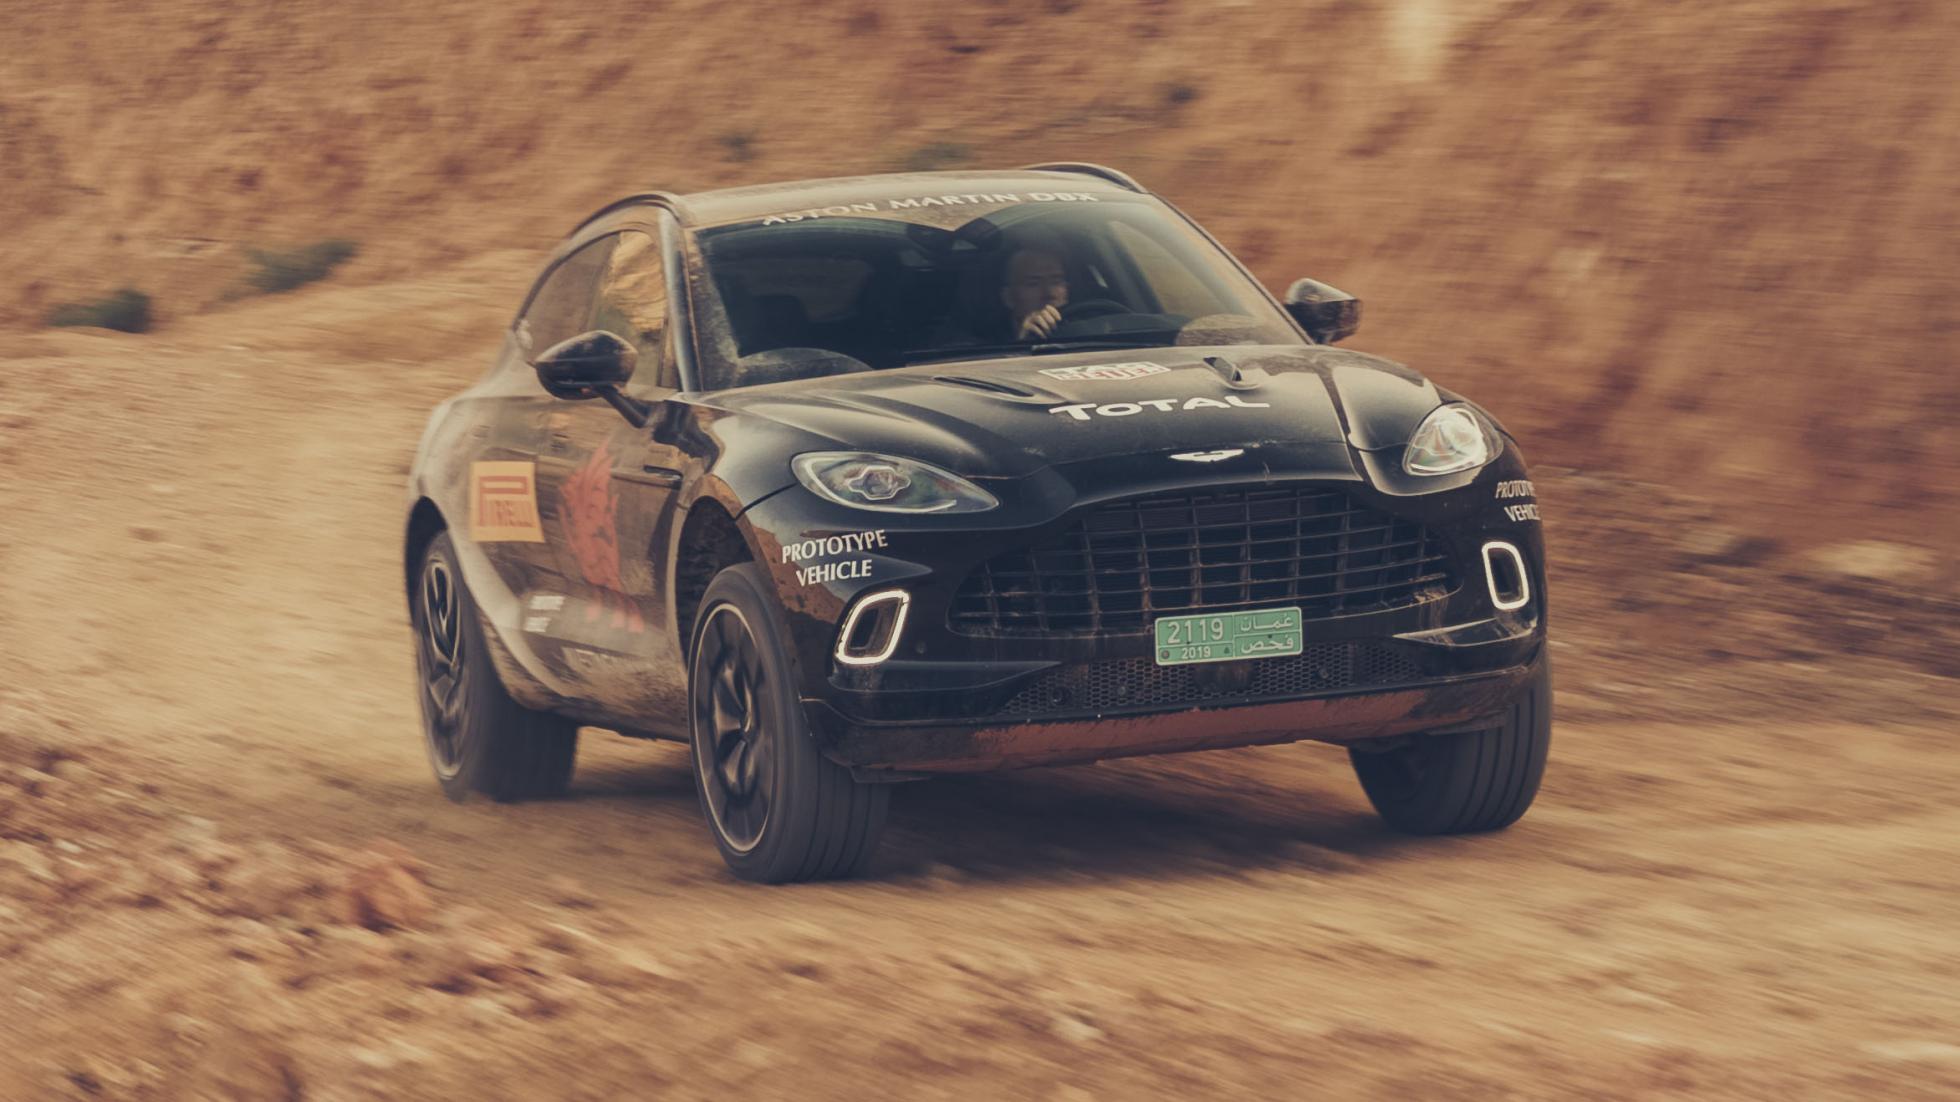 Aston Martin DBX review: 542bhp prototype SUV tested